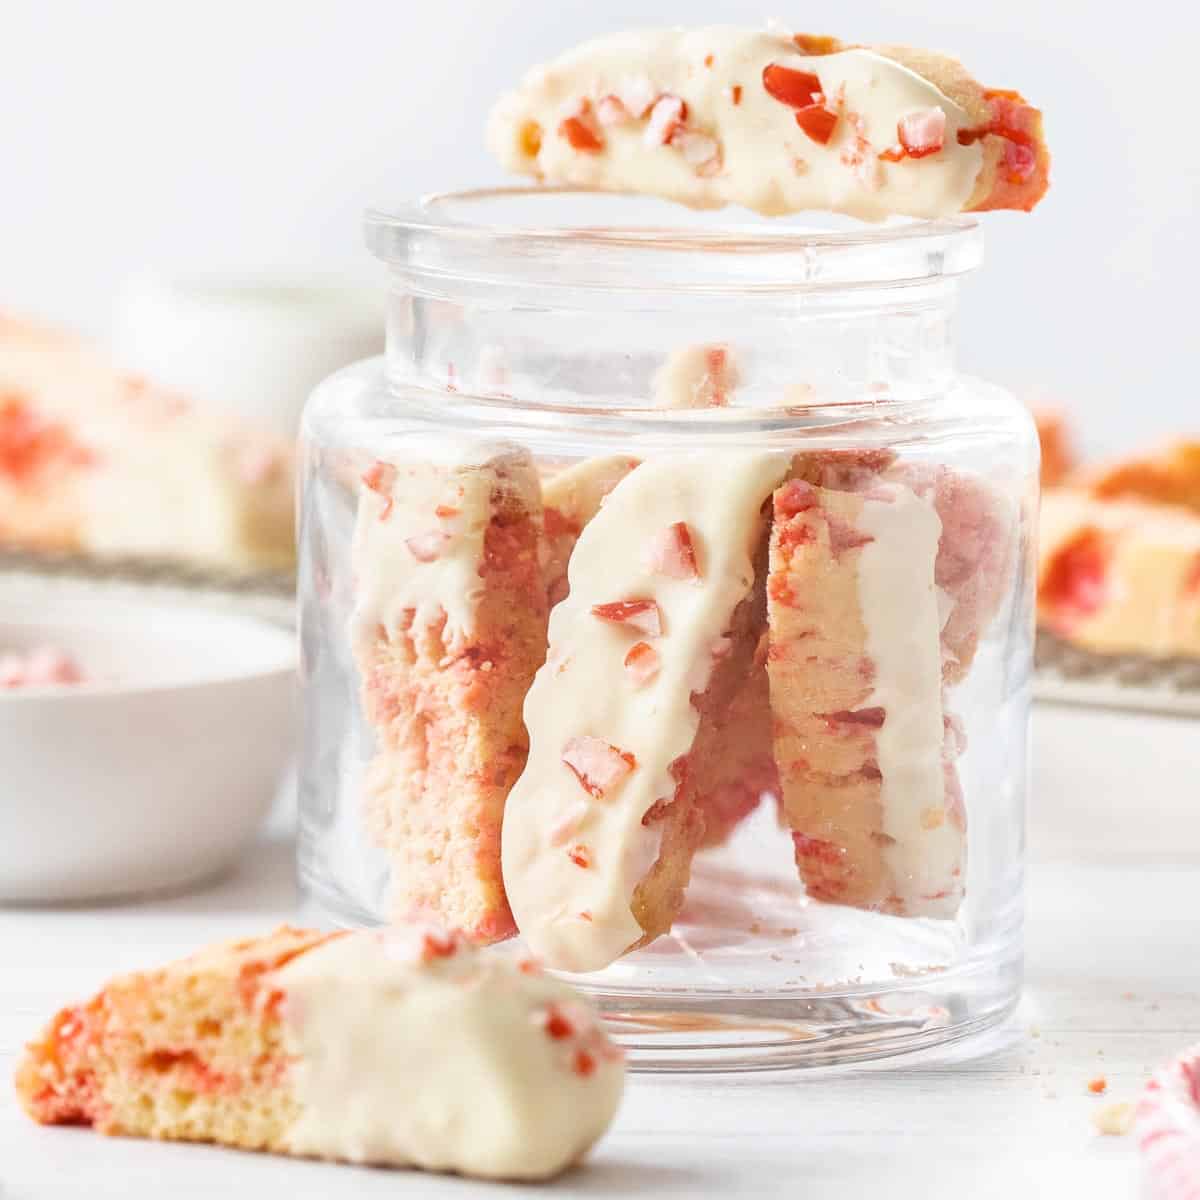 Christmas Biscotti Recipe - With candy cane pieces!